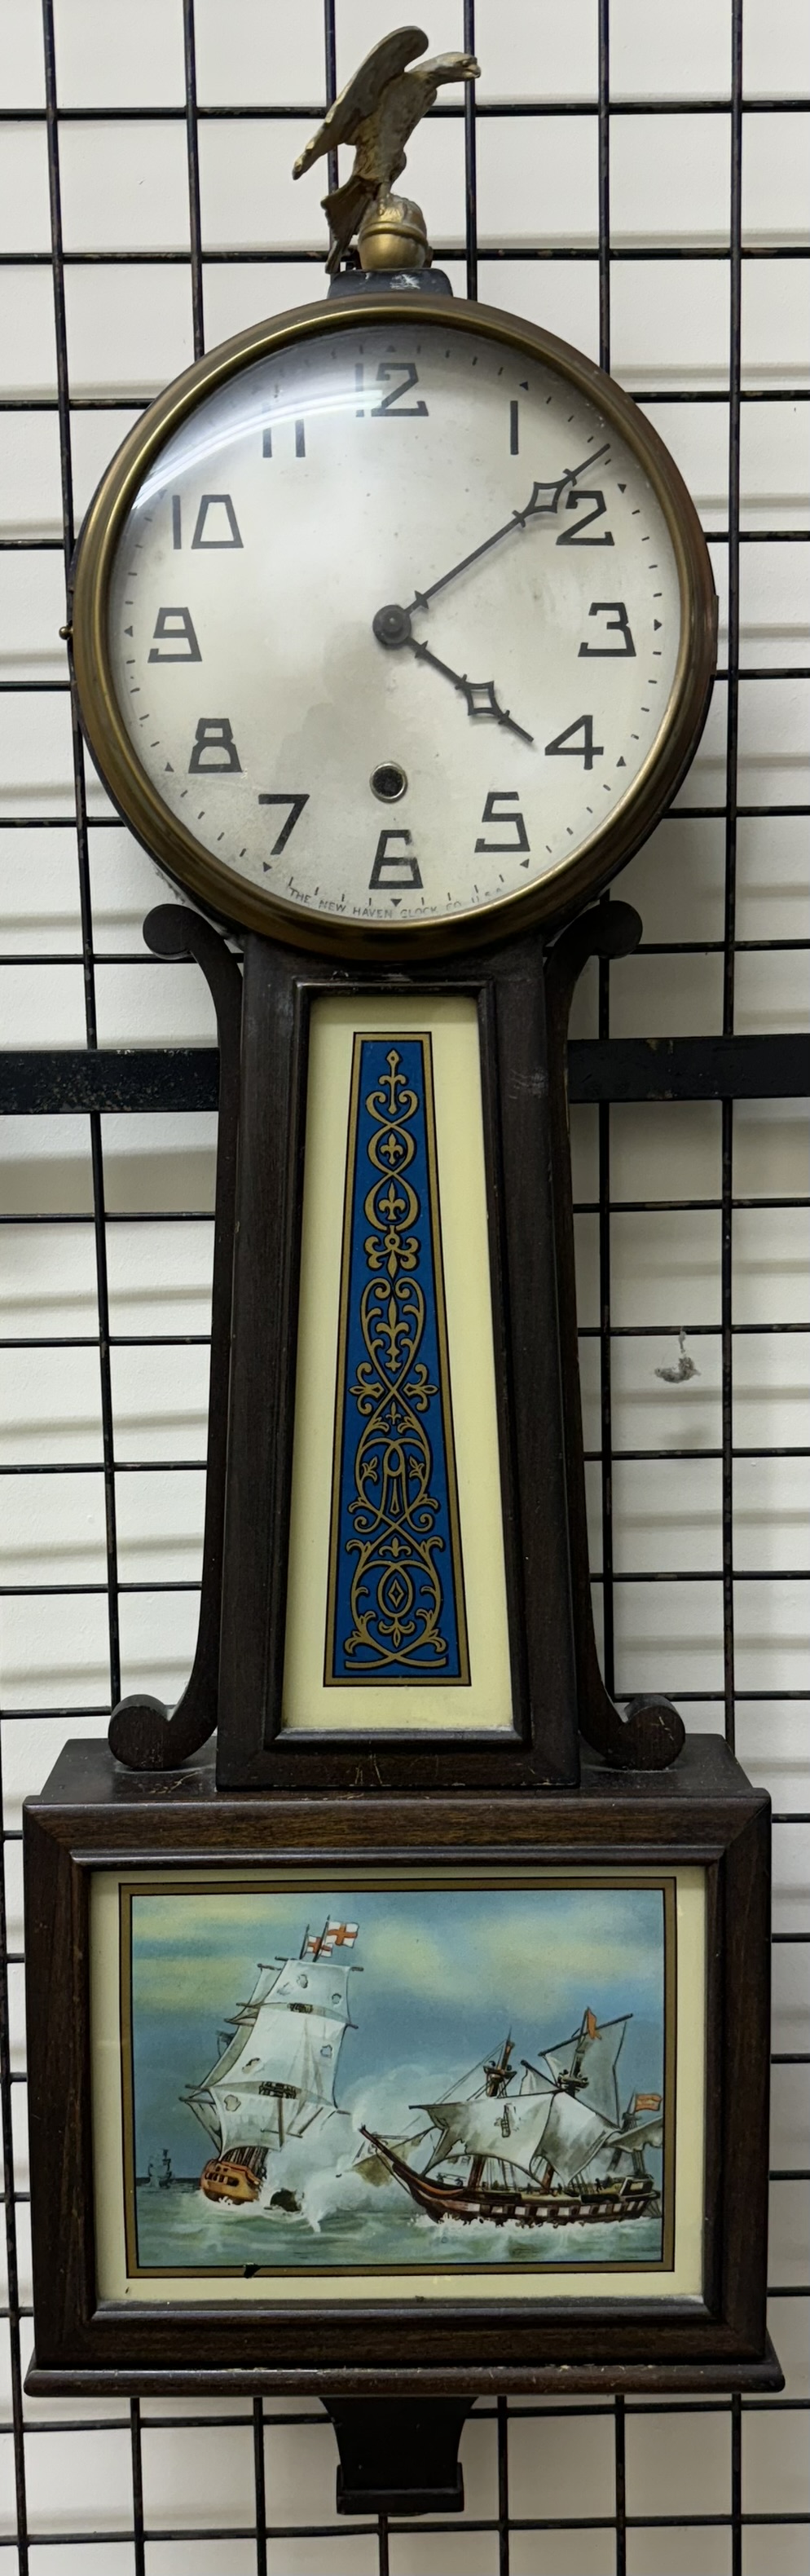 The New Haven Clock Co wall clock with a silvered dial and Arabic numerals with an eagle surmount,